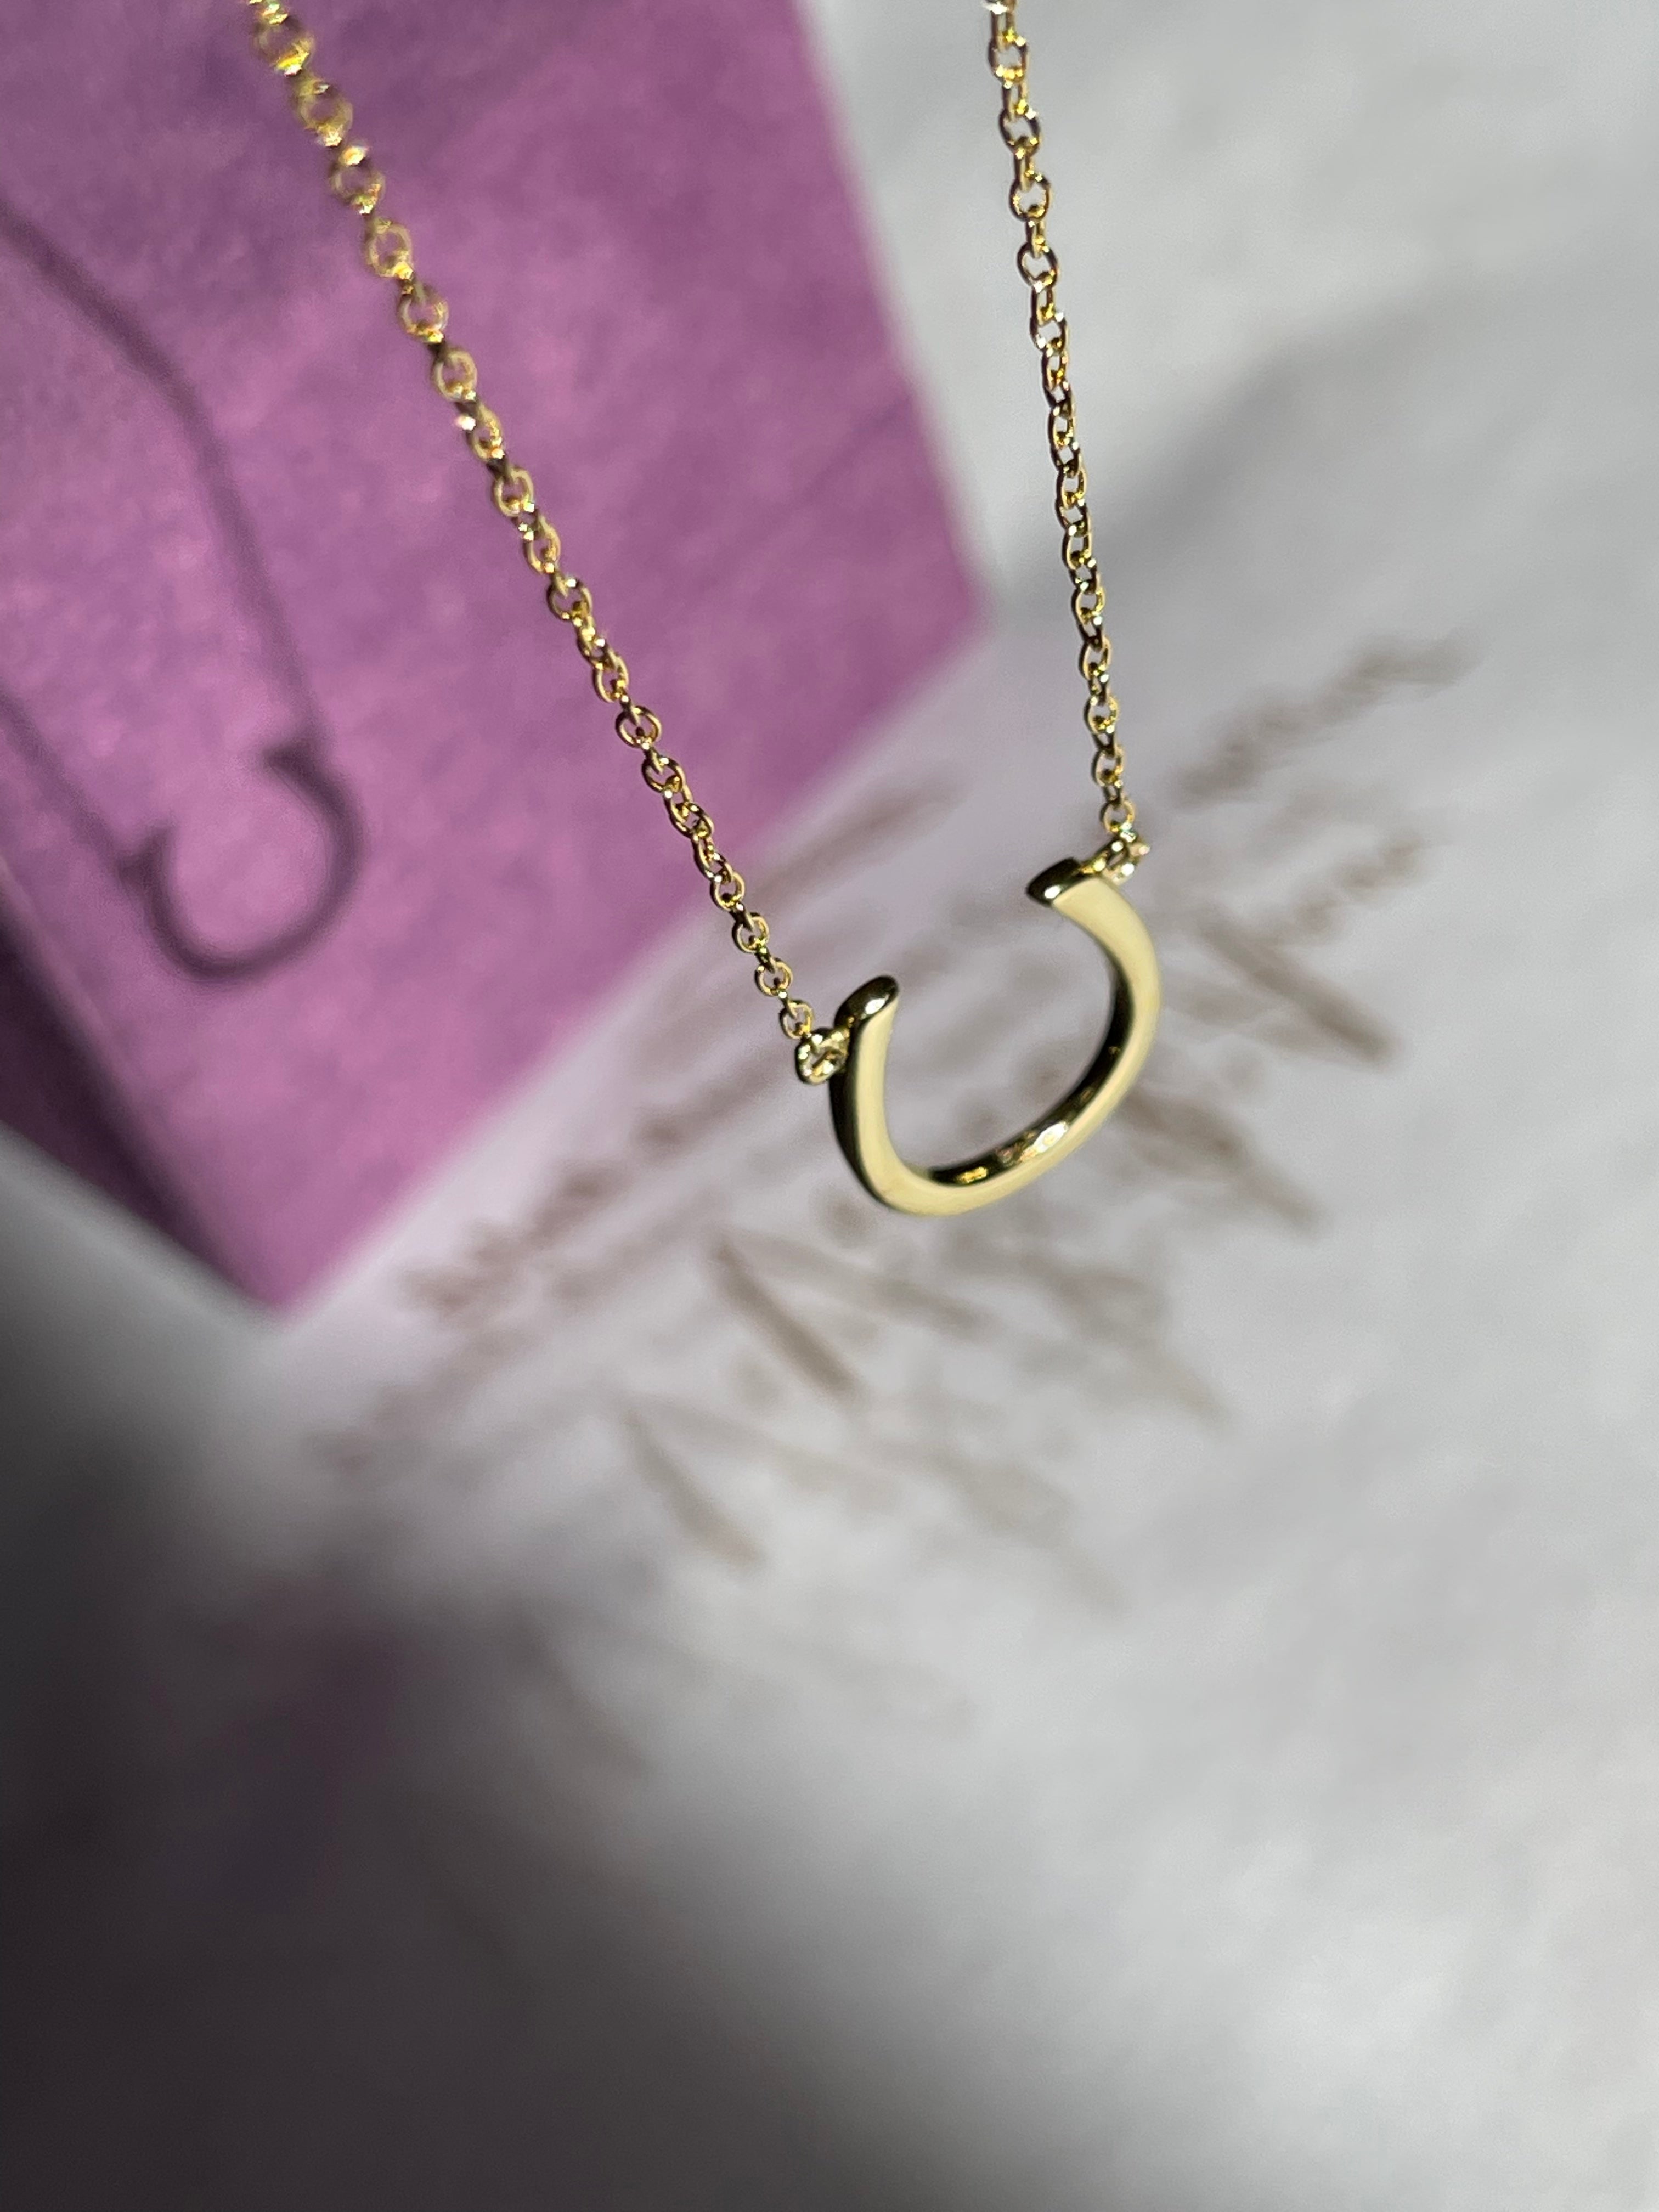 Lucky Horseshoe Necklace 18K Yellow Gold over Sterling Silver